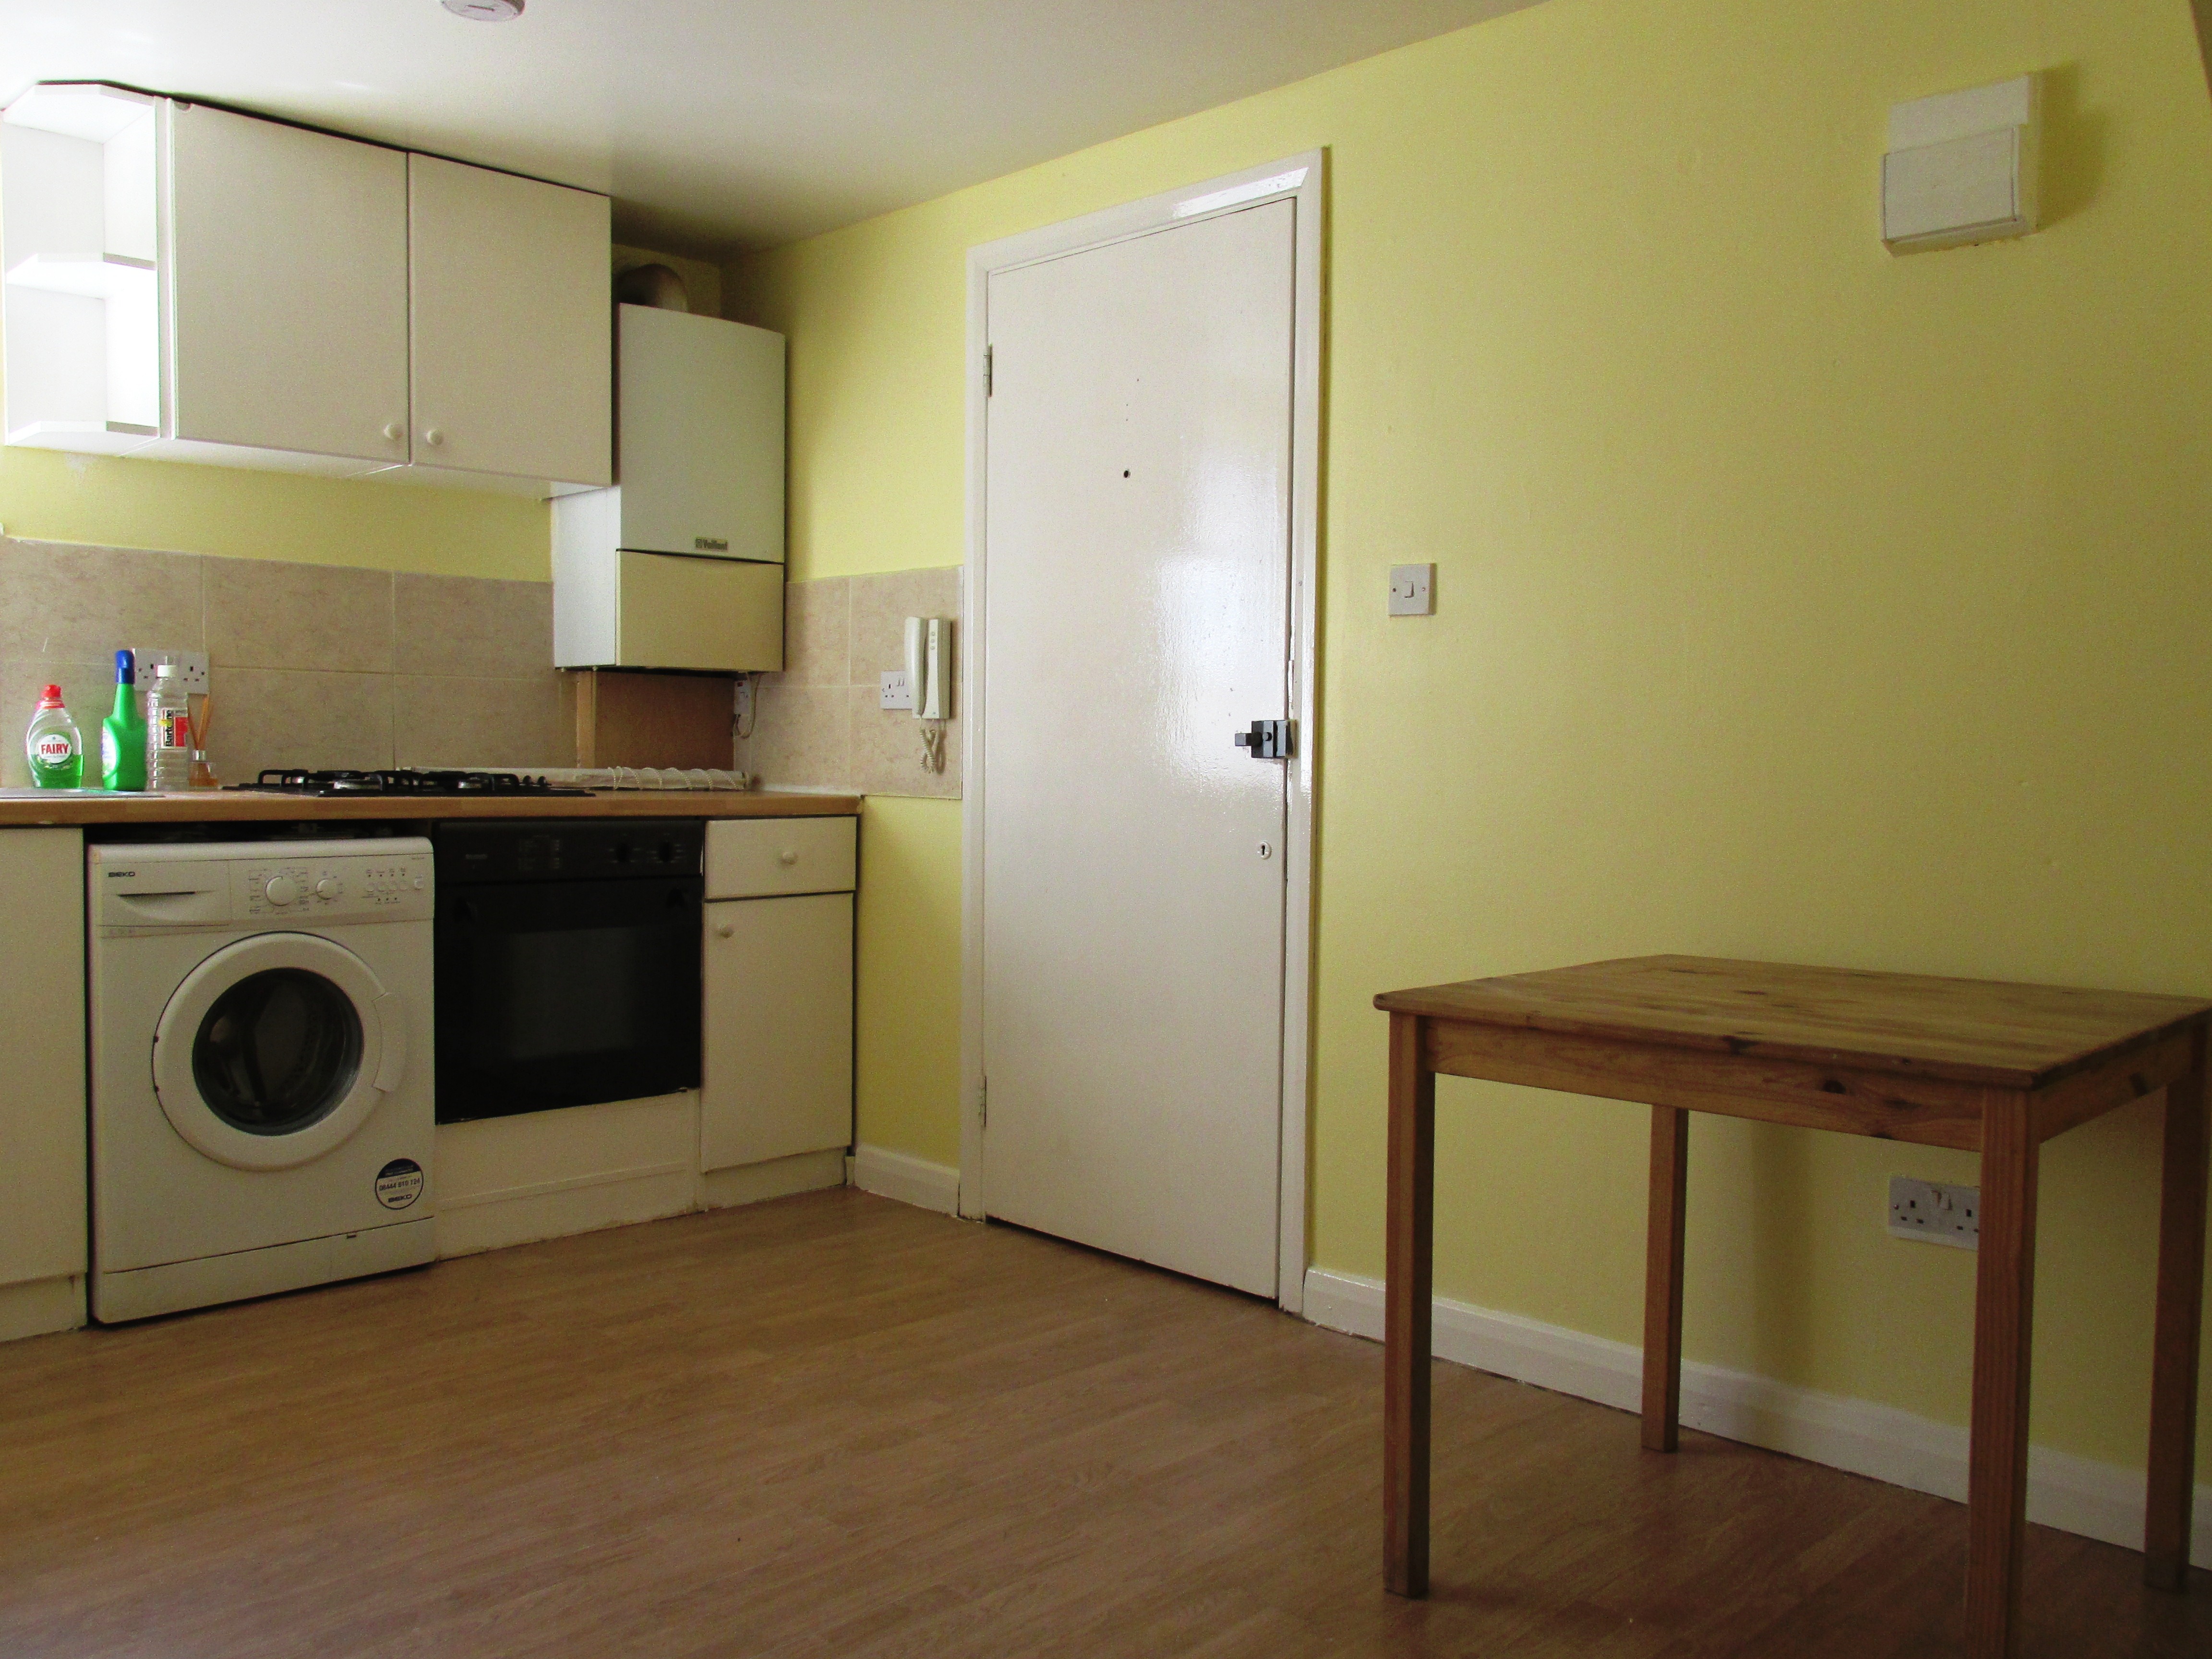 Well located one bedroom flat Hoxton N1.